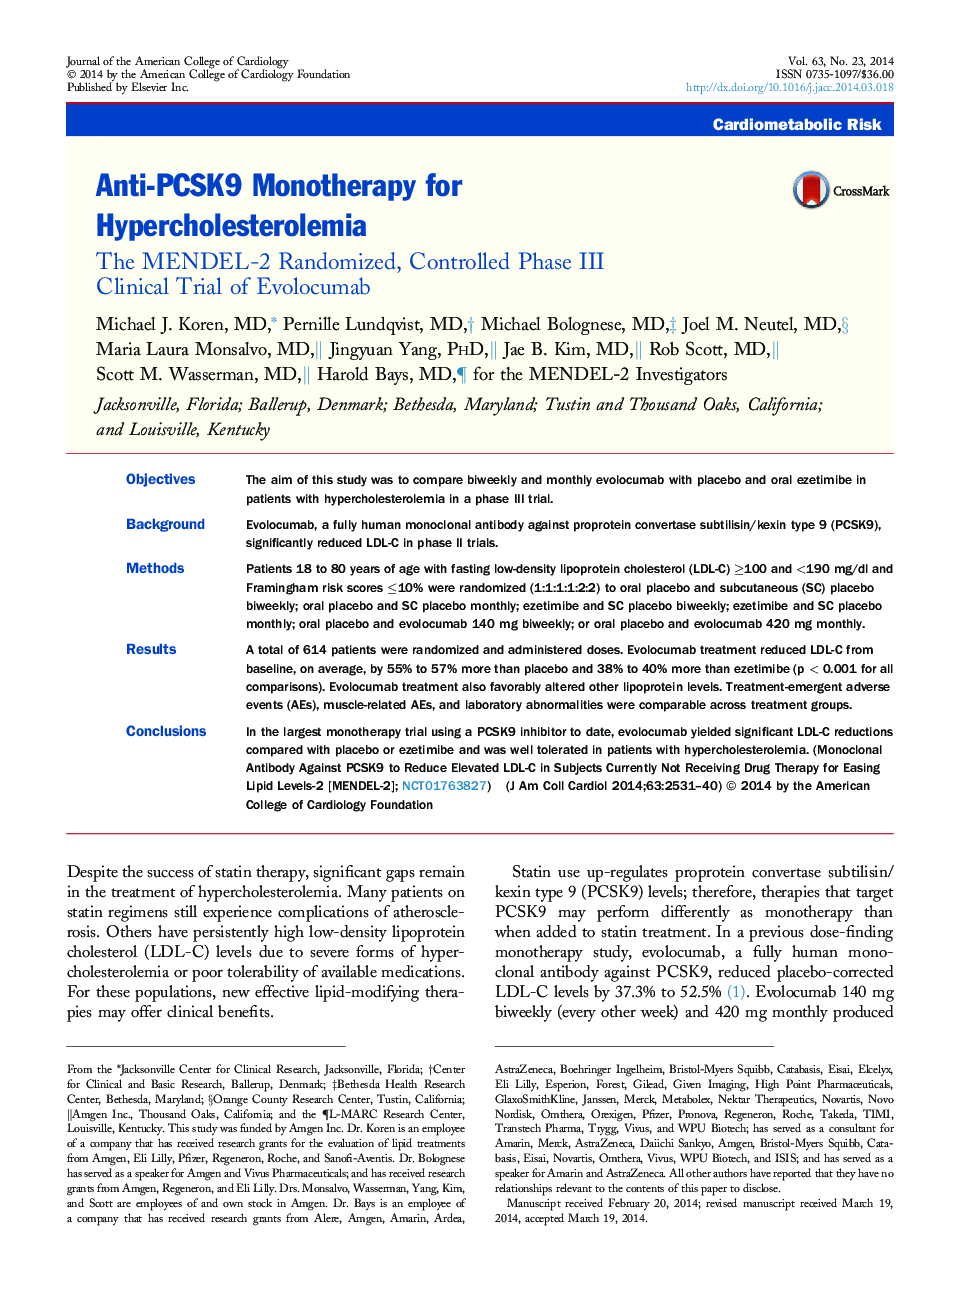 Anti-PCSK9 Monotherapy for Hypercholesterolemia: The MENDEL-2 Randomized, Controlled Phase III ClinicalÂ Trial of Evolocumab